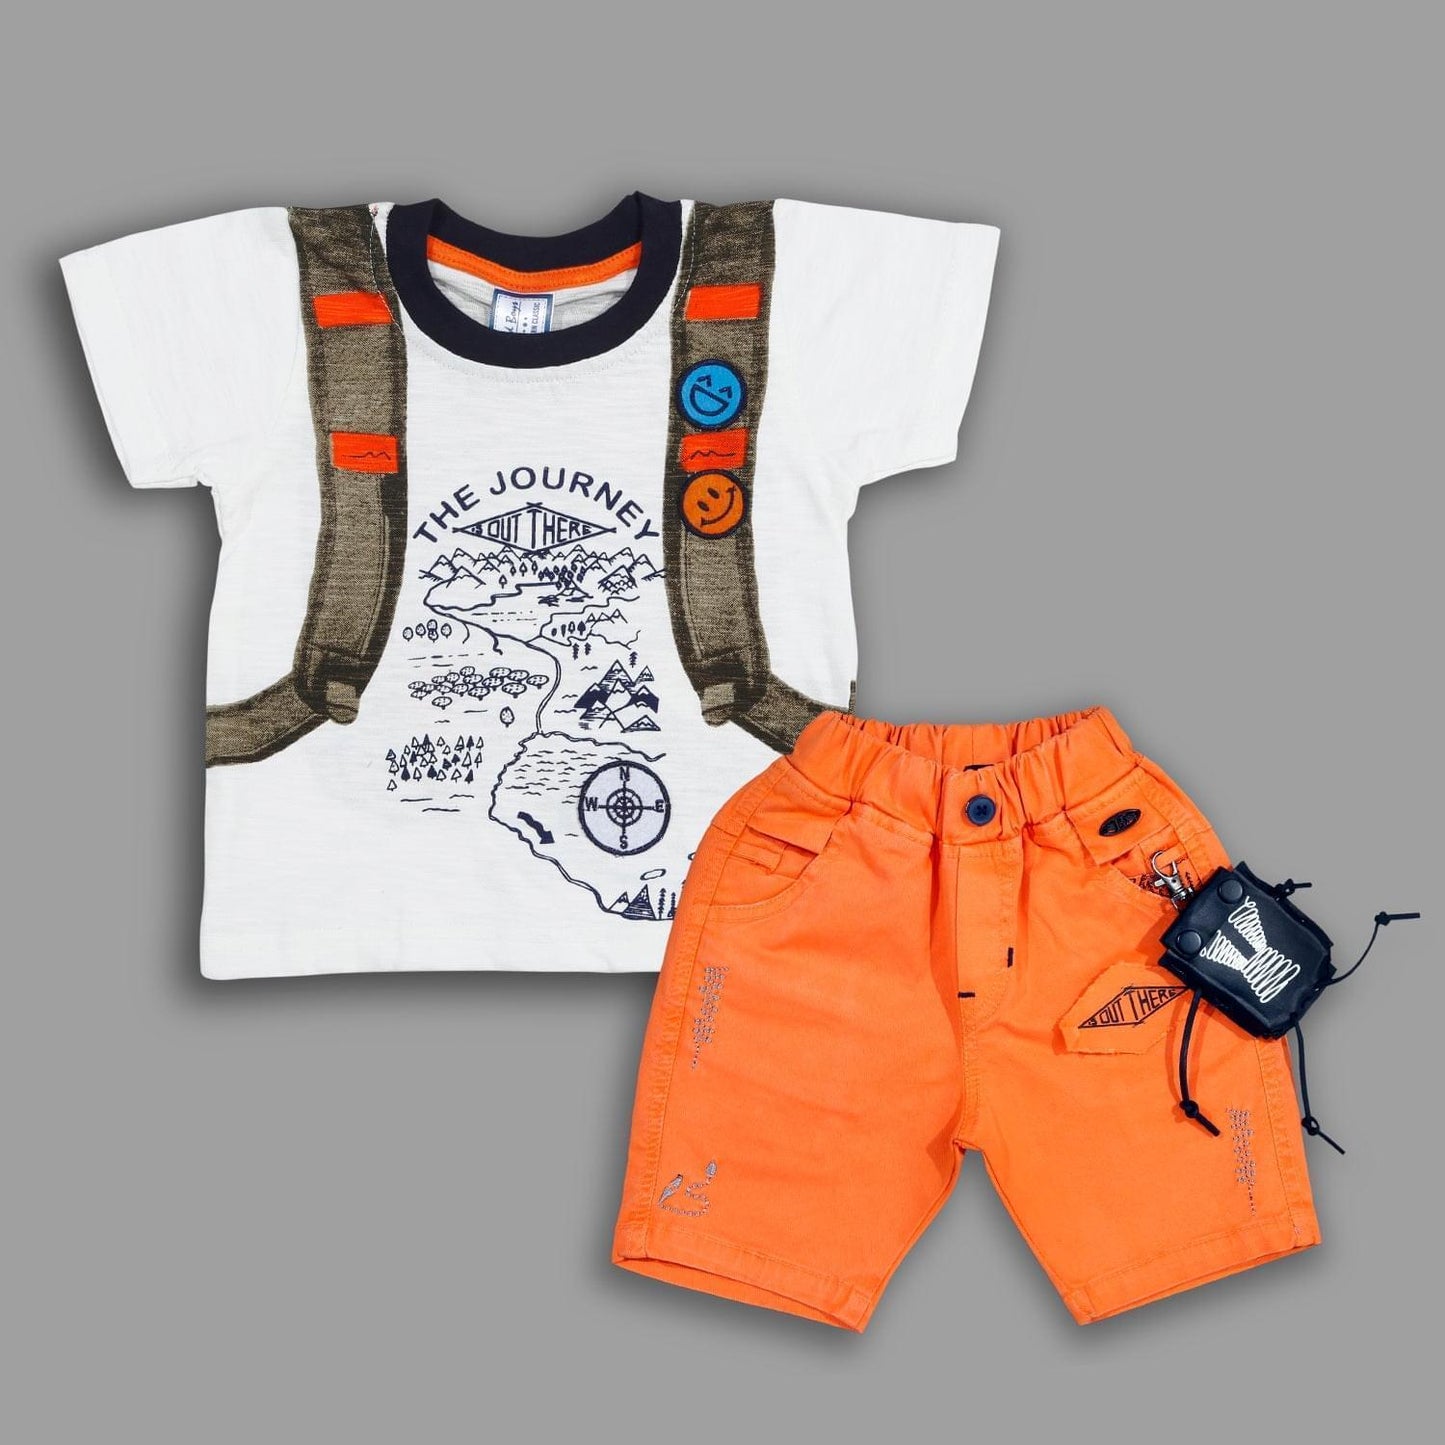 Bad Boys Casual Wear Outfit with Stylish T-shirt and Shorts